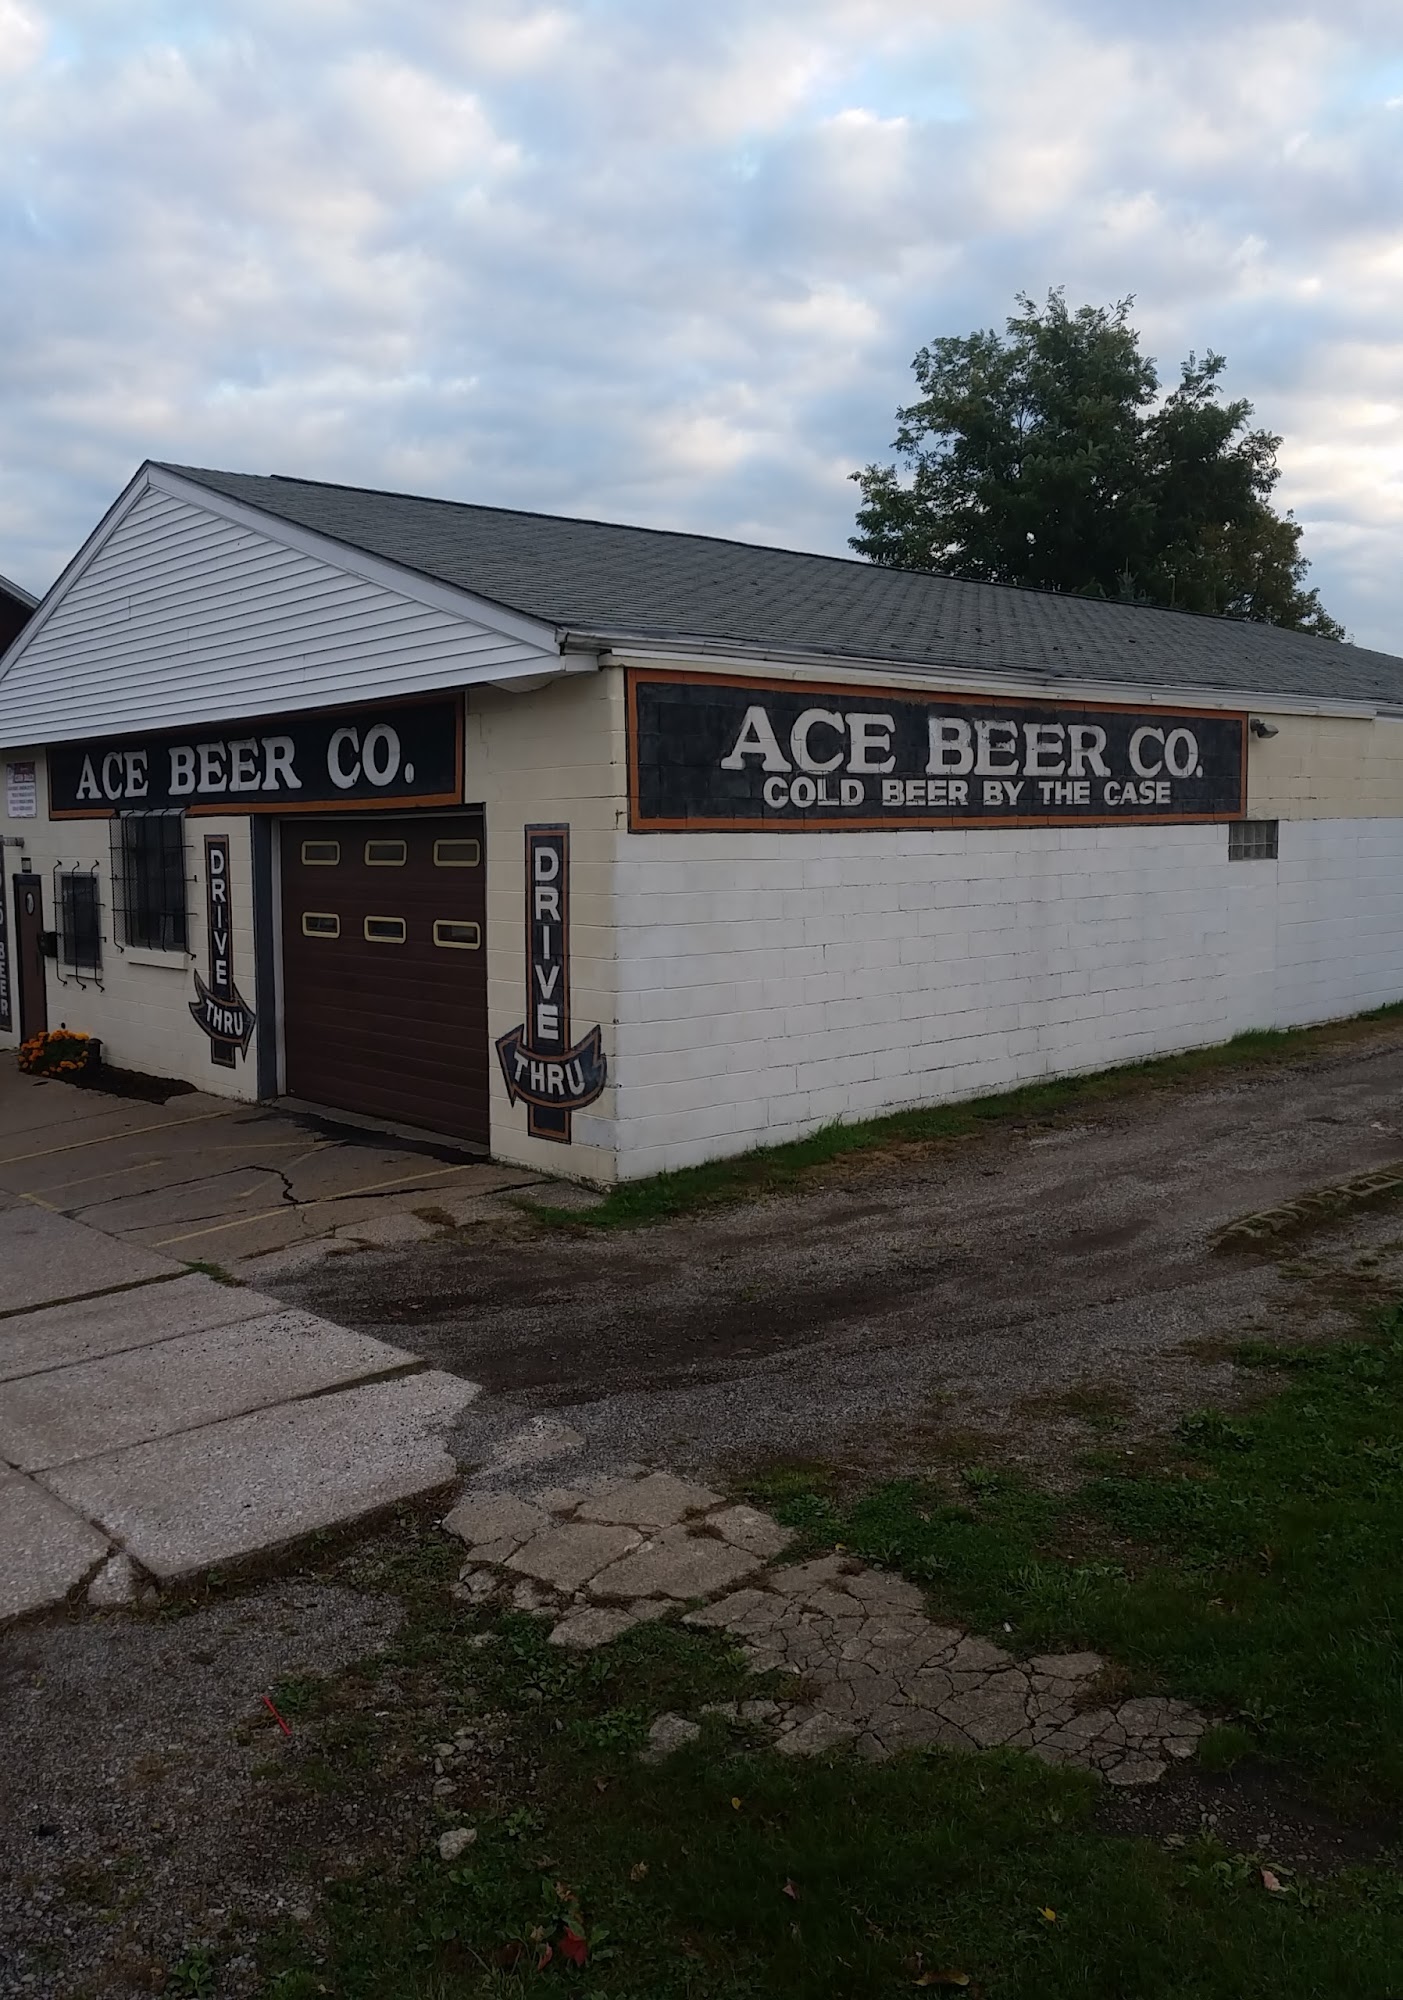 Ace Beer Co.